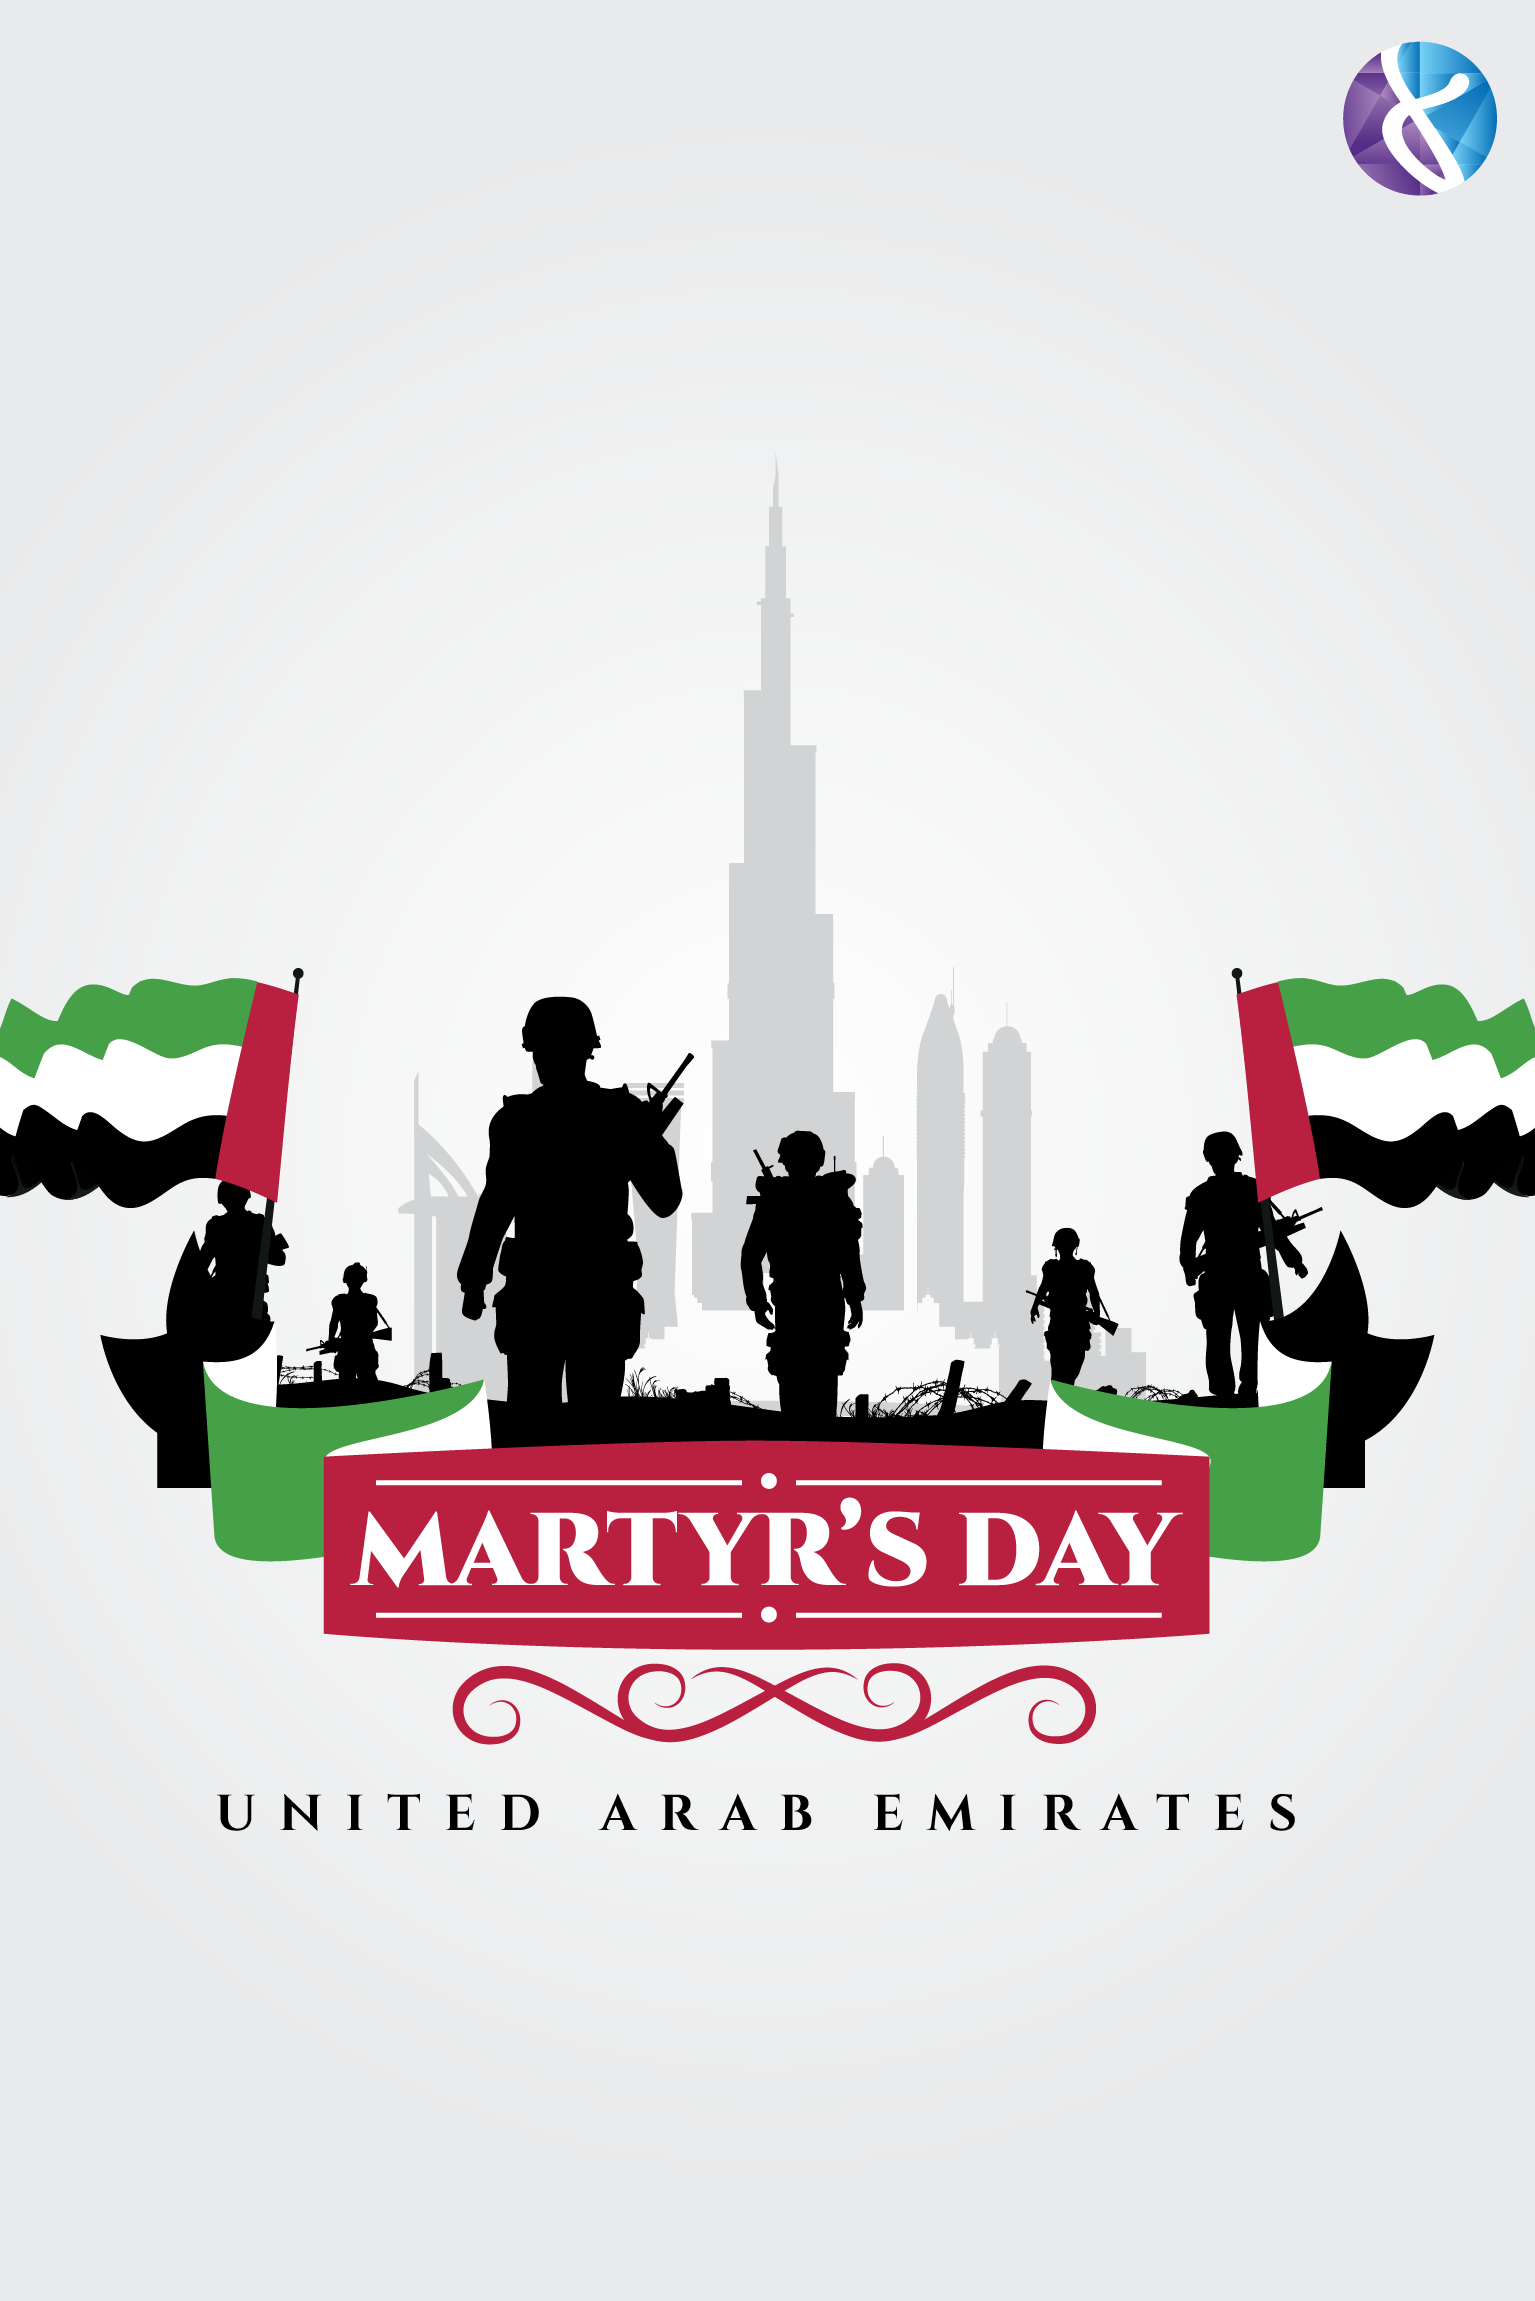 Dimensions' team would like to recognize the sacrifices and dedication of Emirati martyrs who have given their life in. Uae national day, Martyrs' day, Martyrs